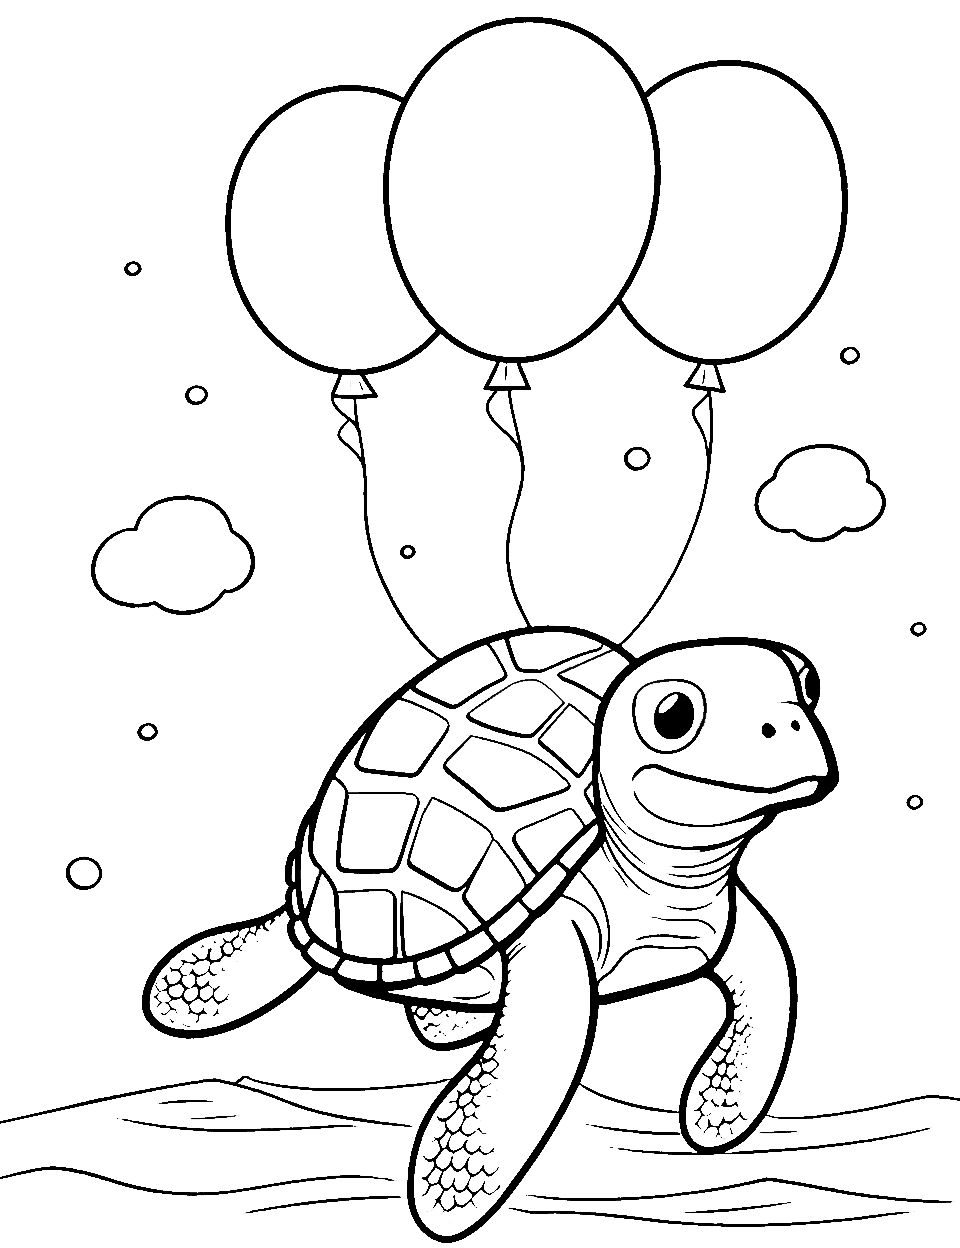 Balloon-Tied Turtle Coloring Page - A turtle floating slightly above the ground, tied to a bunch of balloons.